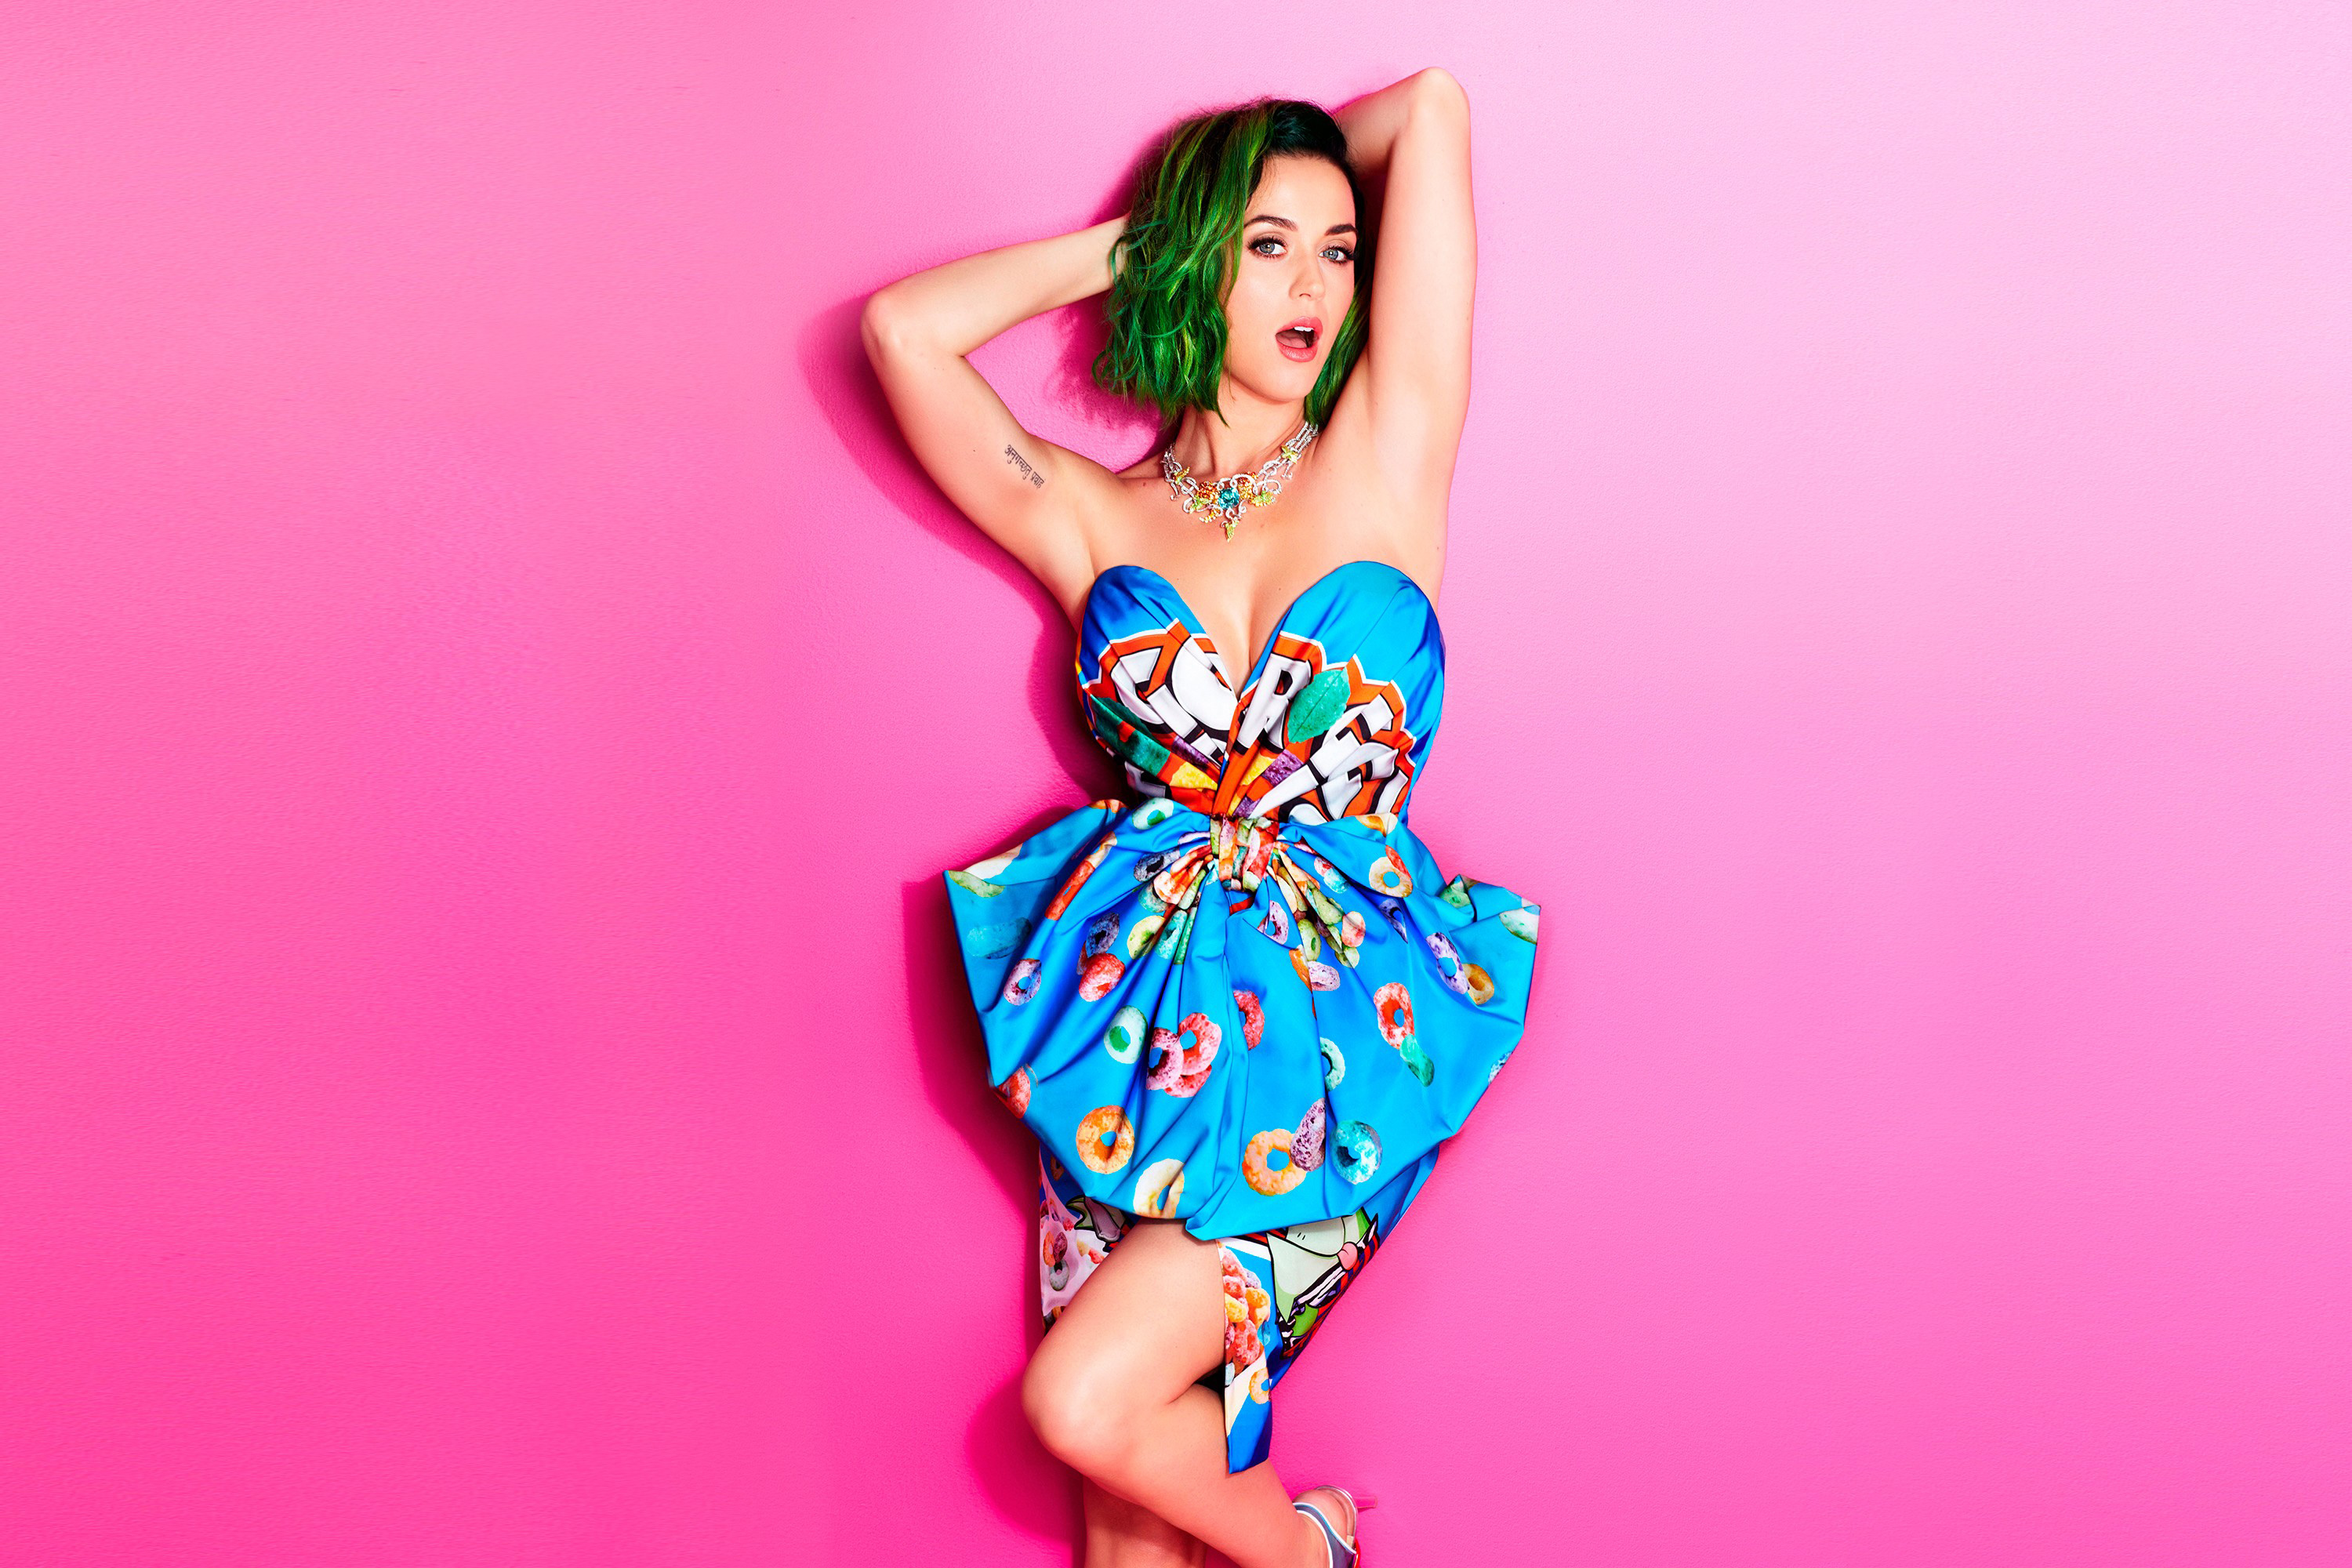 Green Hair Katy Perry Necklace 3000x2000